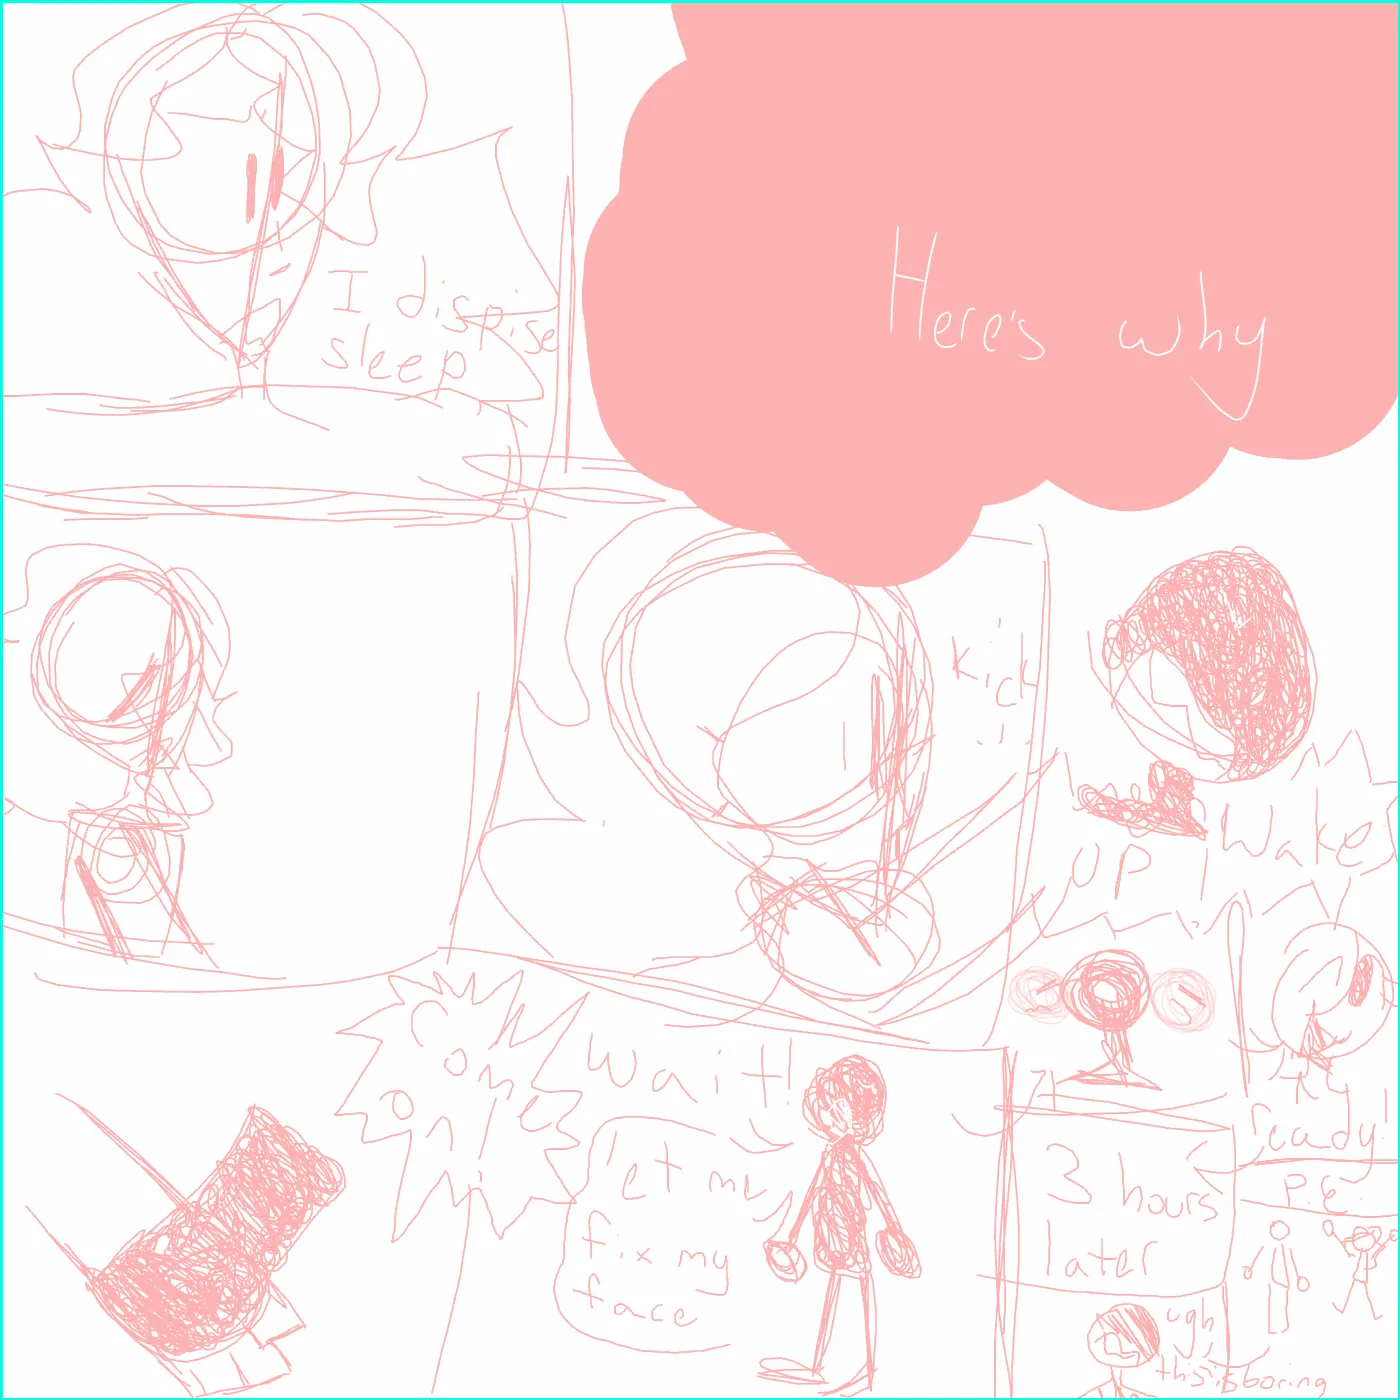 so yea wip of 2st page of my vent comic called